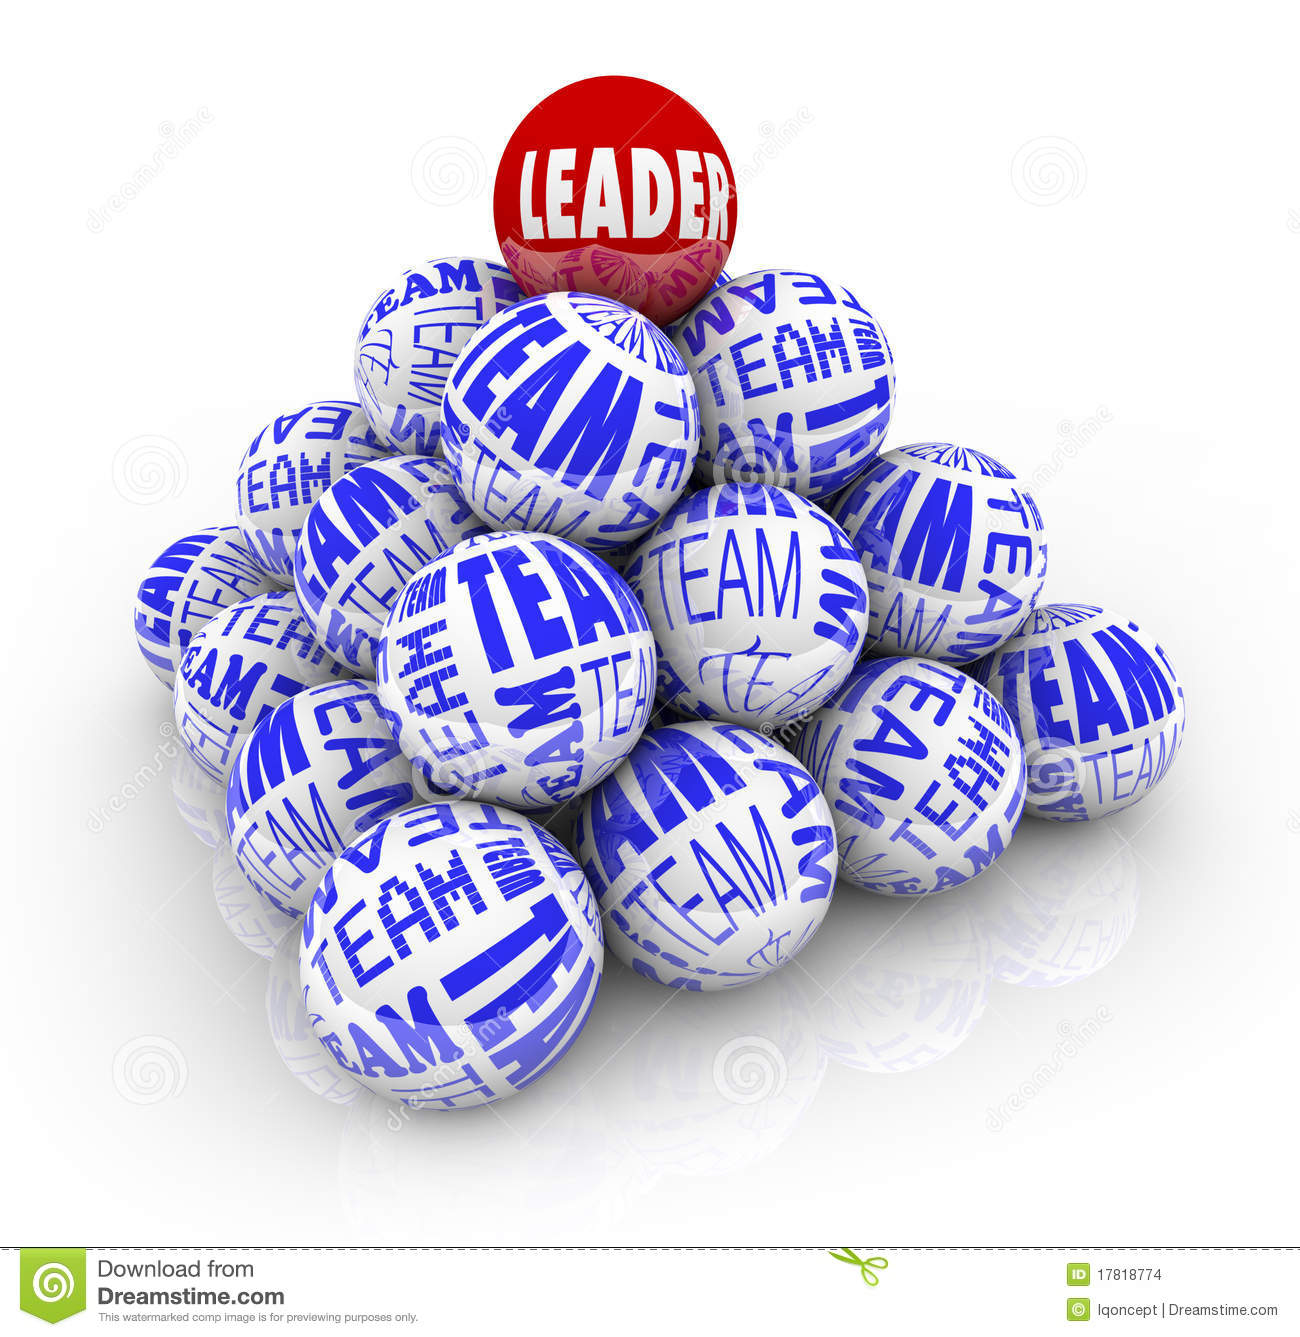 Leader And Team   Balls Forming Pyramid Stock Images   Image  17818774